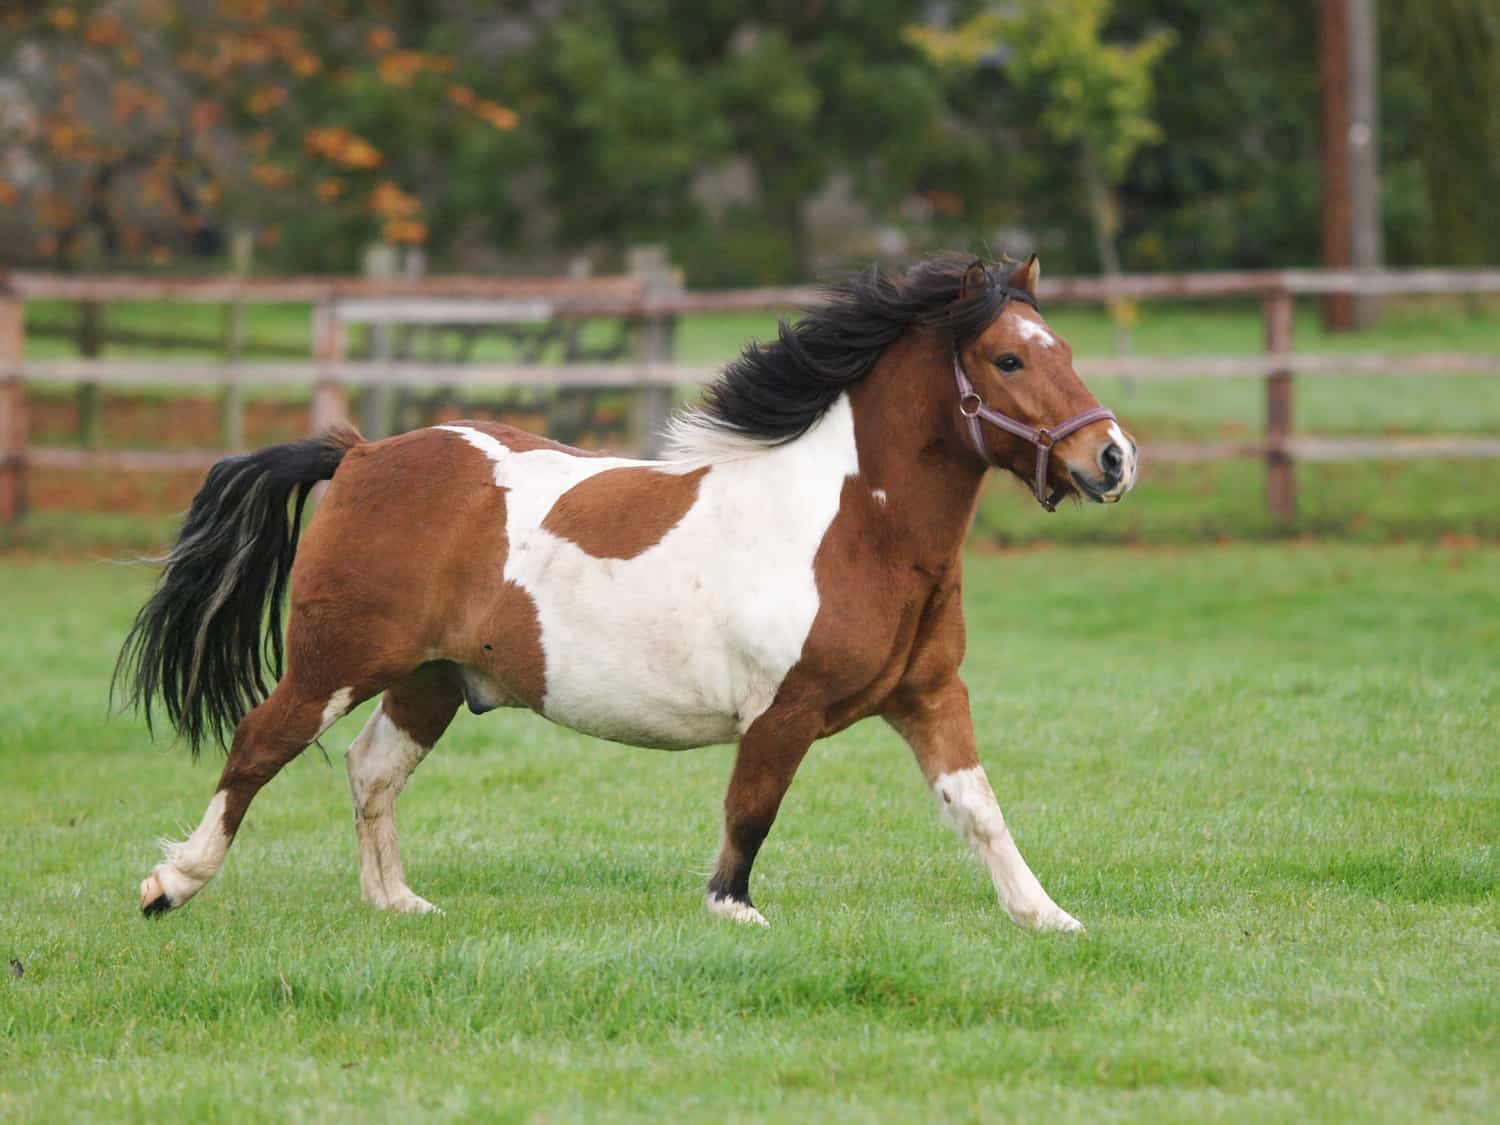 What Are the Different Types of Horses by Weight